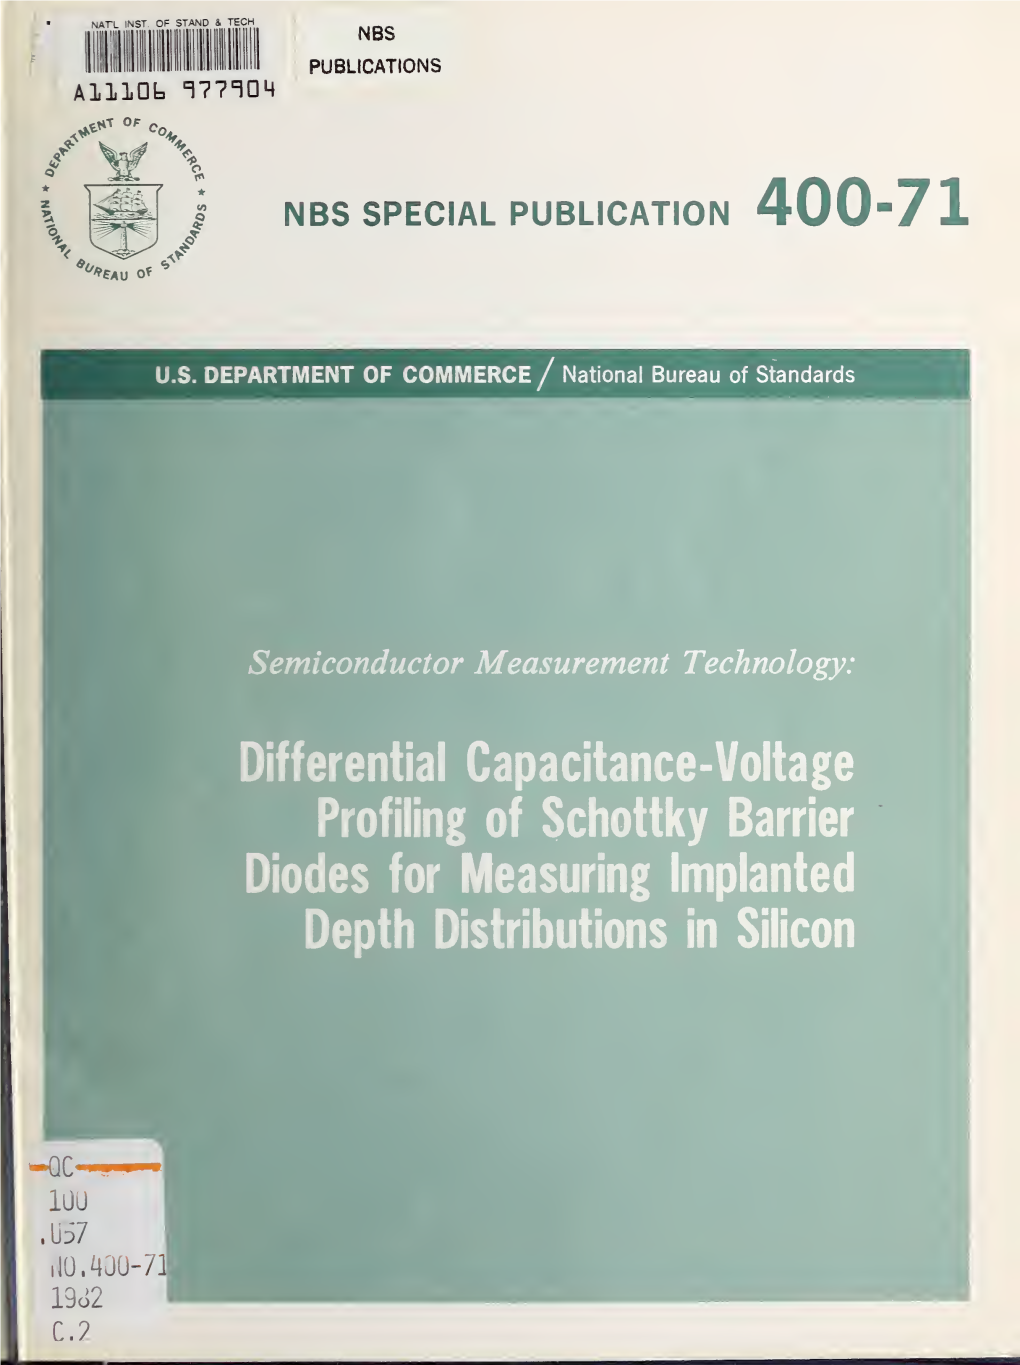 Differential Capacitance-Voltage Profiling of Schottky Barrier Diodes for Measuring Implanted